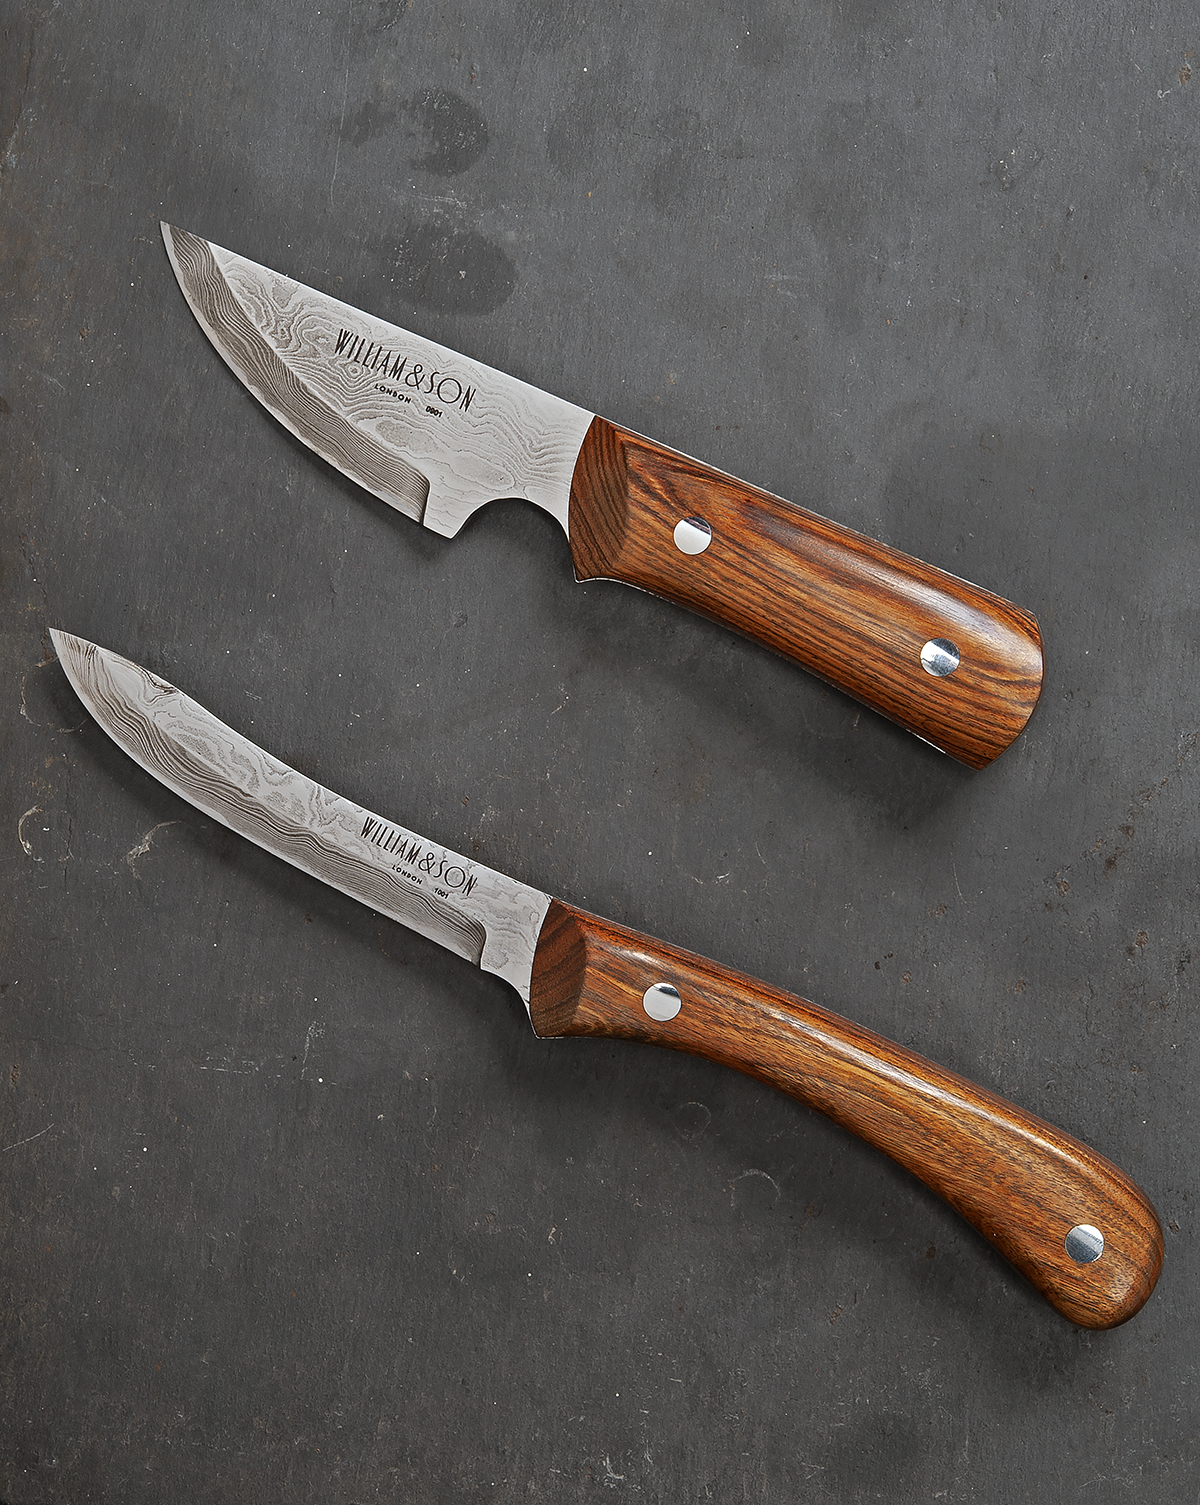 WILLIAM & SON, LONDON TWO DAMASCUS-BLADED SKINNING or PAIRING KNIVES, serial no's. 0901 & 1001,